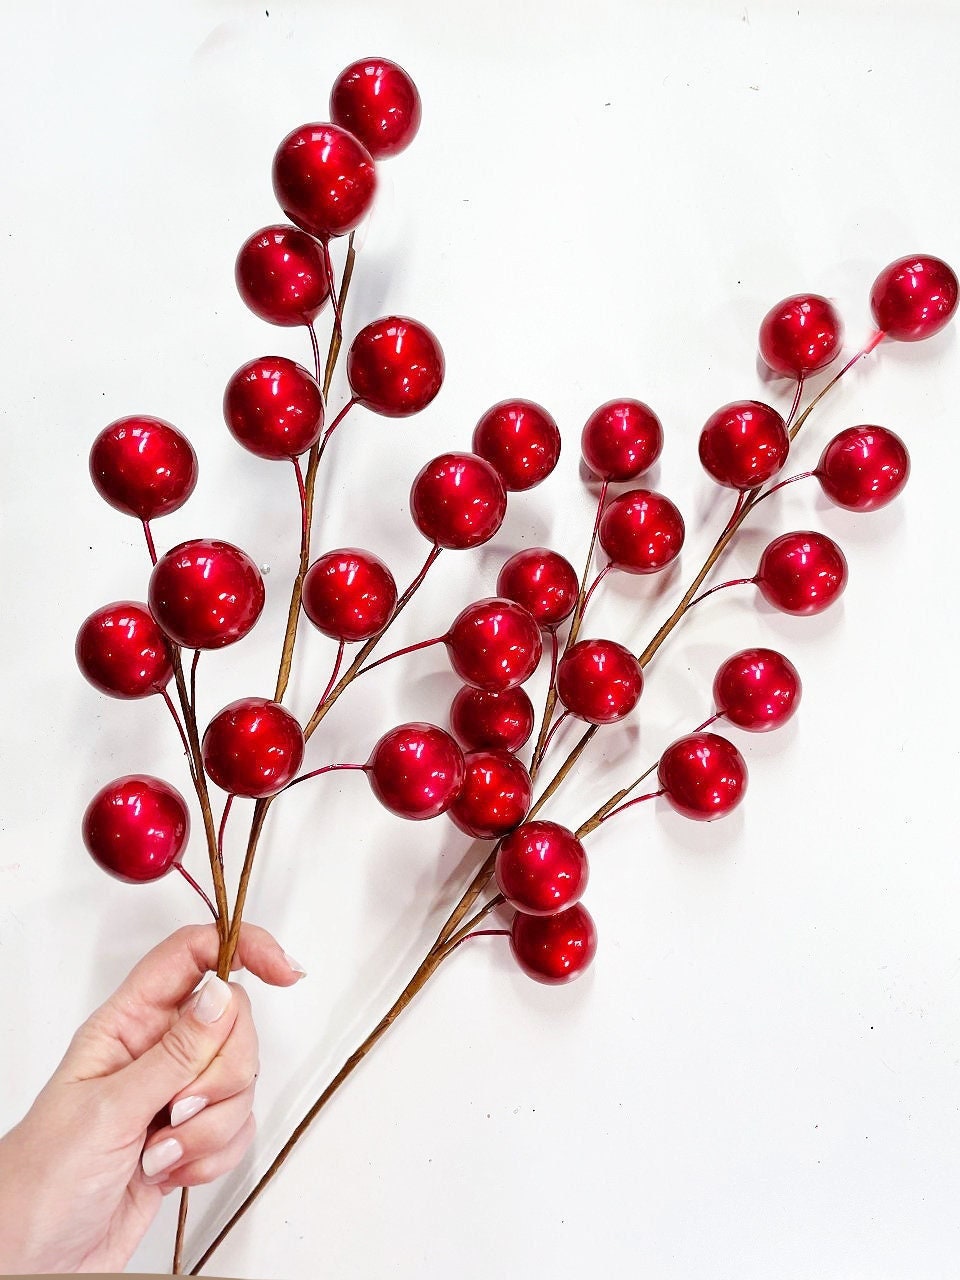 Set of 12: Vibrant Red Holly Berry Stems with 35 Lifelike Berries, 17-Inch, Festive Accents, DIY Arts & Crafts, Wreaths, & Garlands, Berry Picks, Home & Office Decor